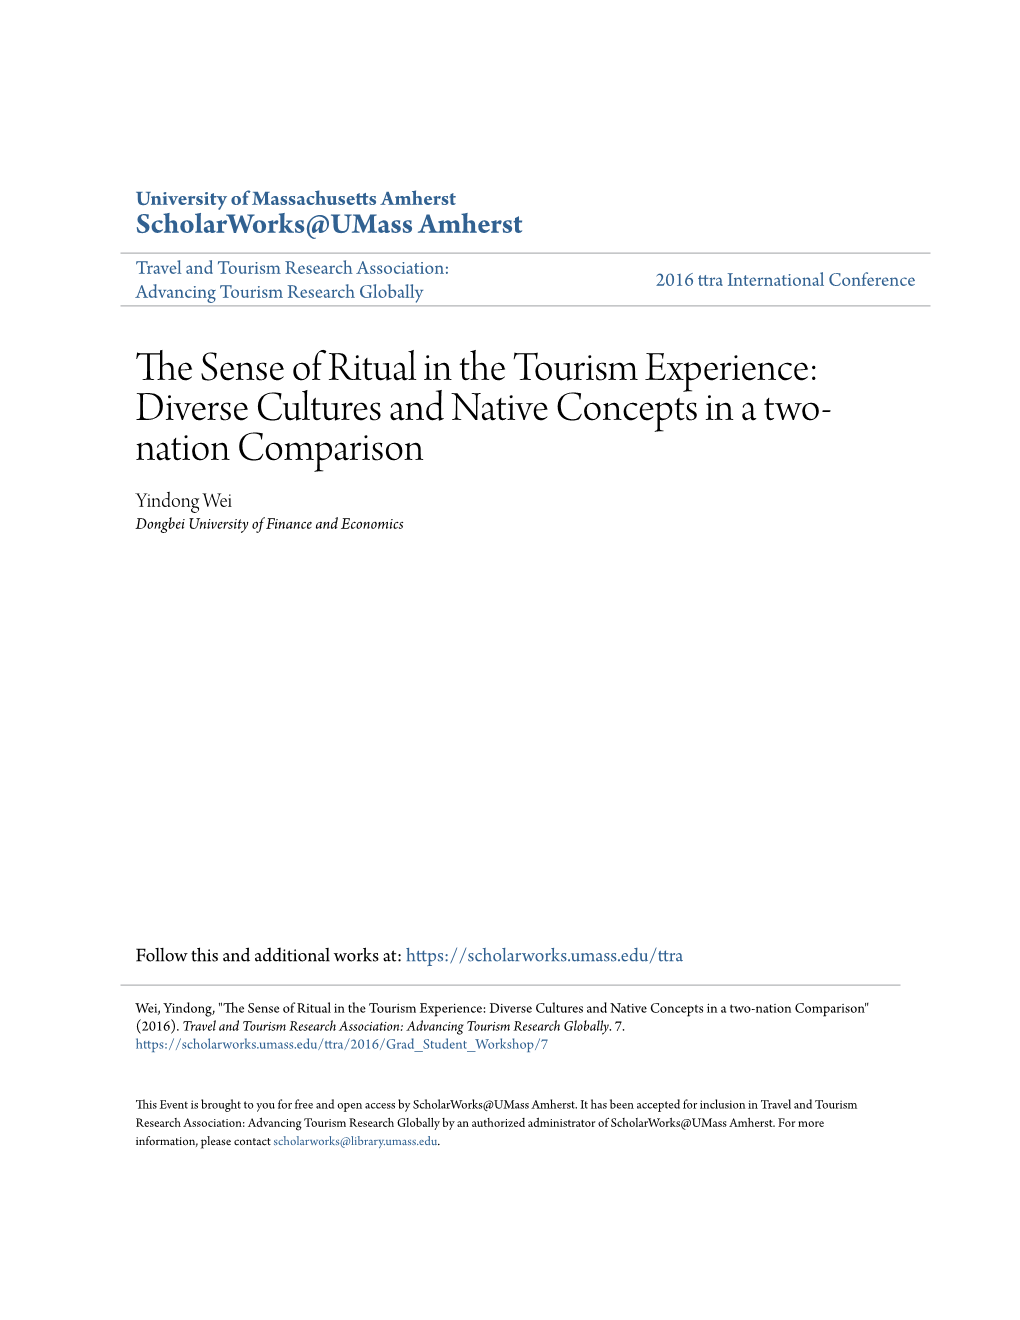 The Sense of Ritual in the Tourism Experience: Diverse Cultures and Native Concepts in a Two-Nation Comparison